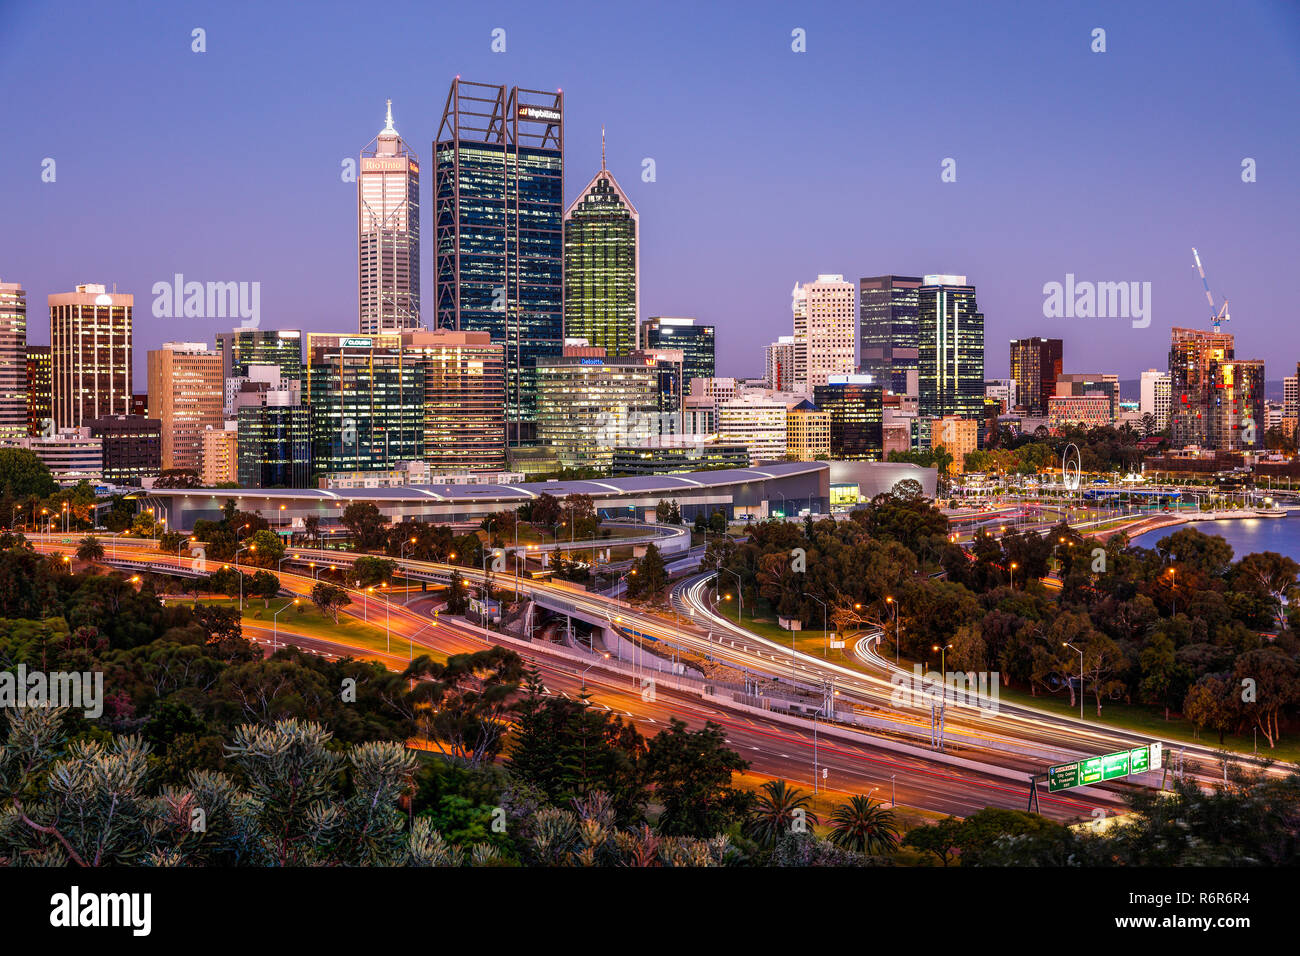 Perth CBD ab Frasers Avenue gesehen, Kings Park and Botanical Gardens. Stockfoto